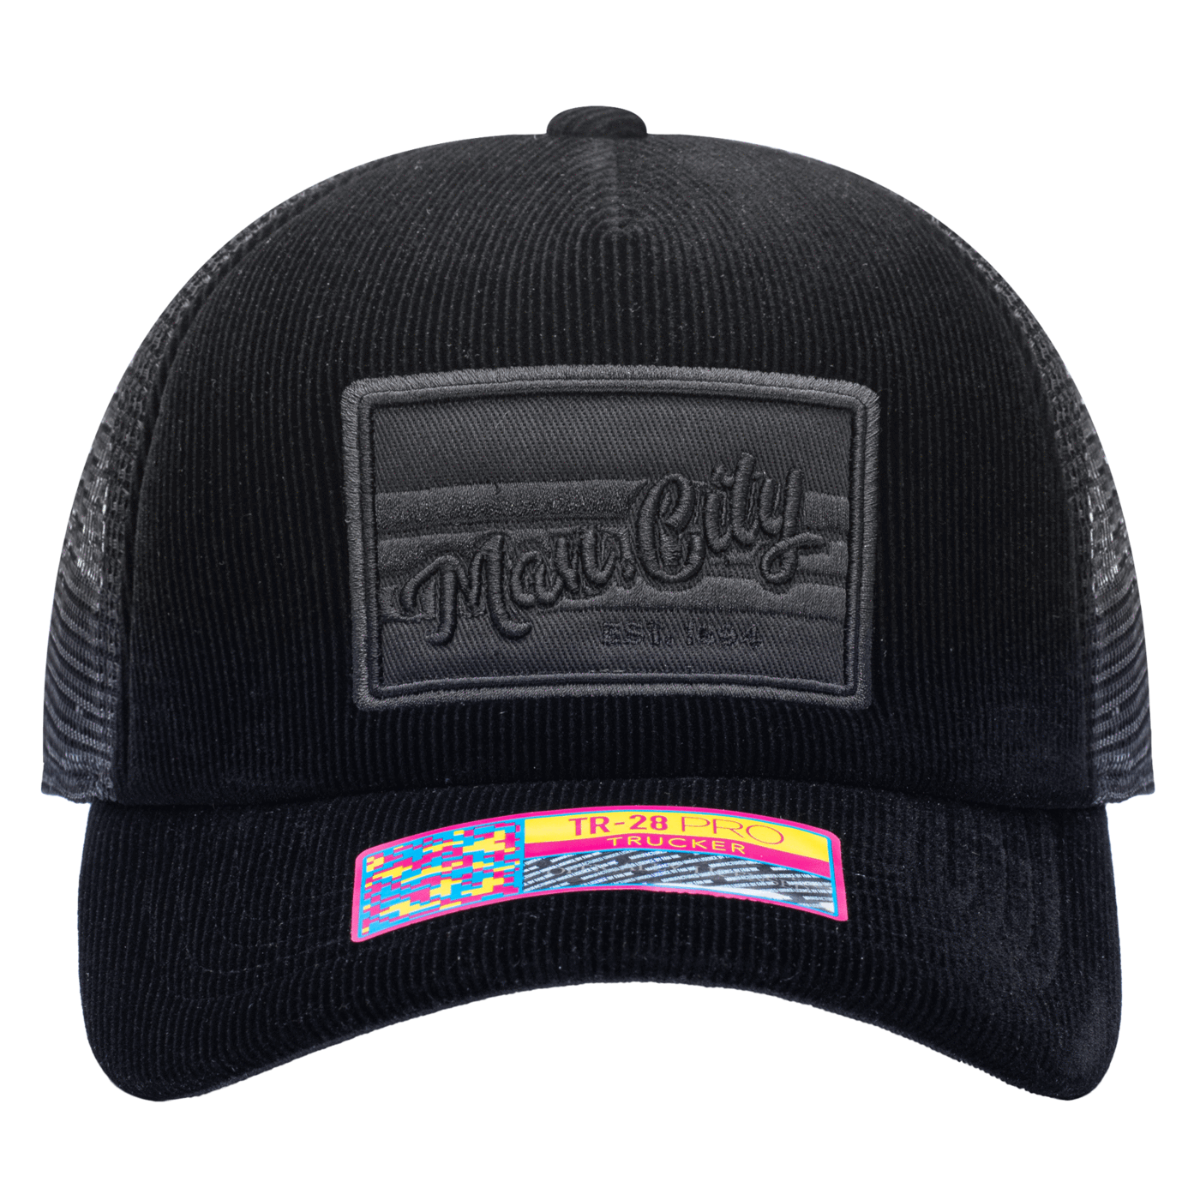 FI Collection Manchester City Signature Trucker Hat - Black (Front)